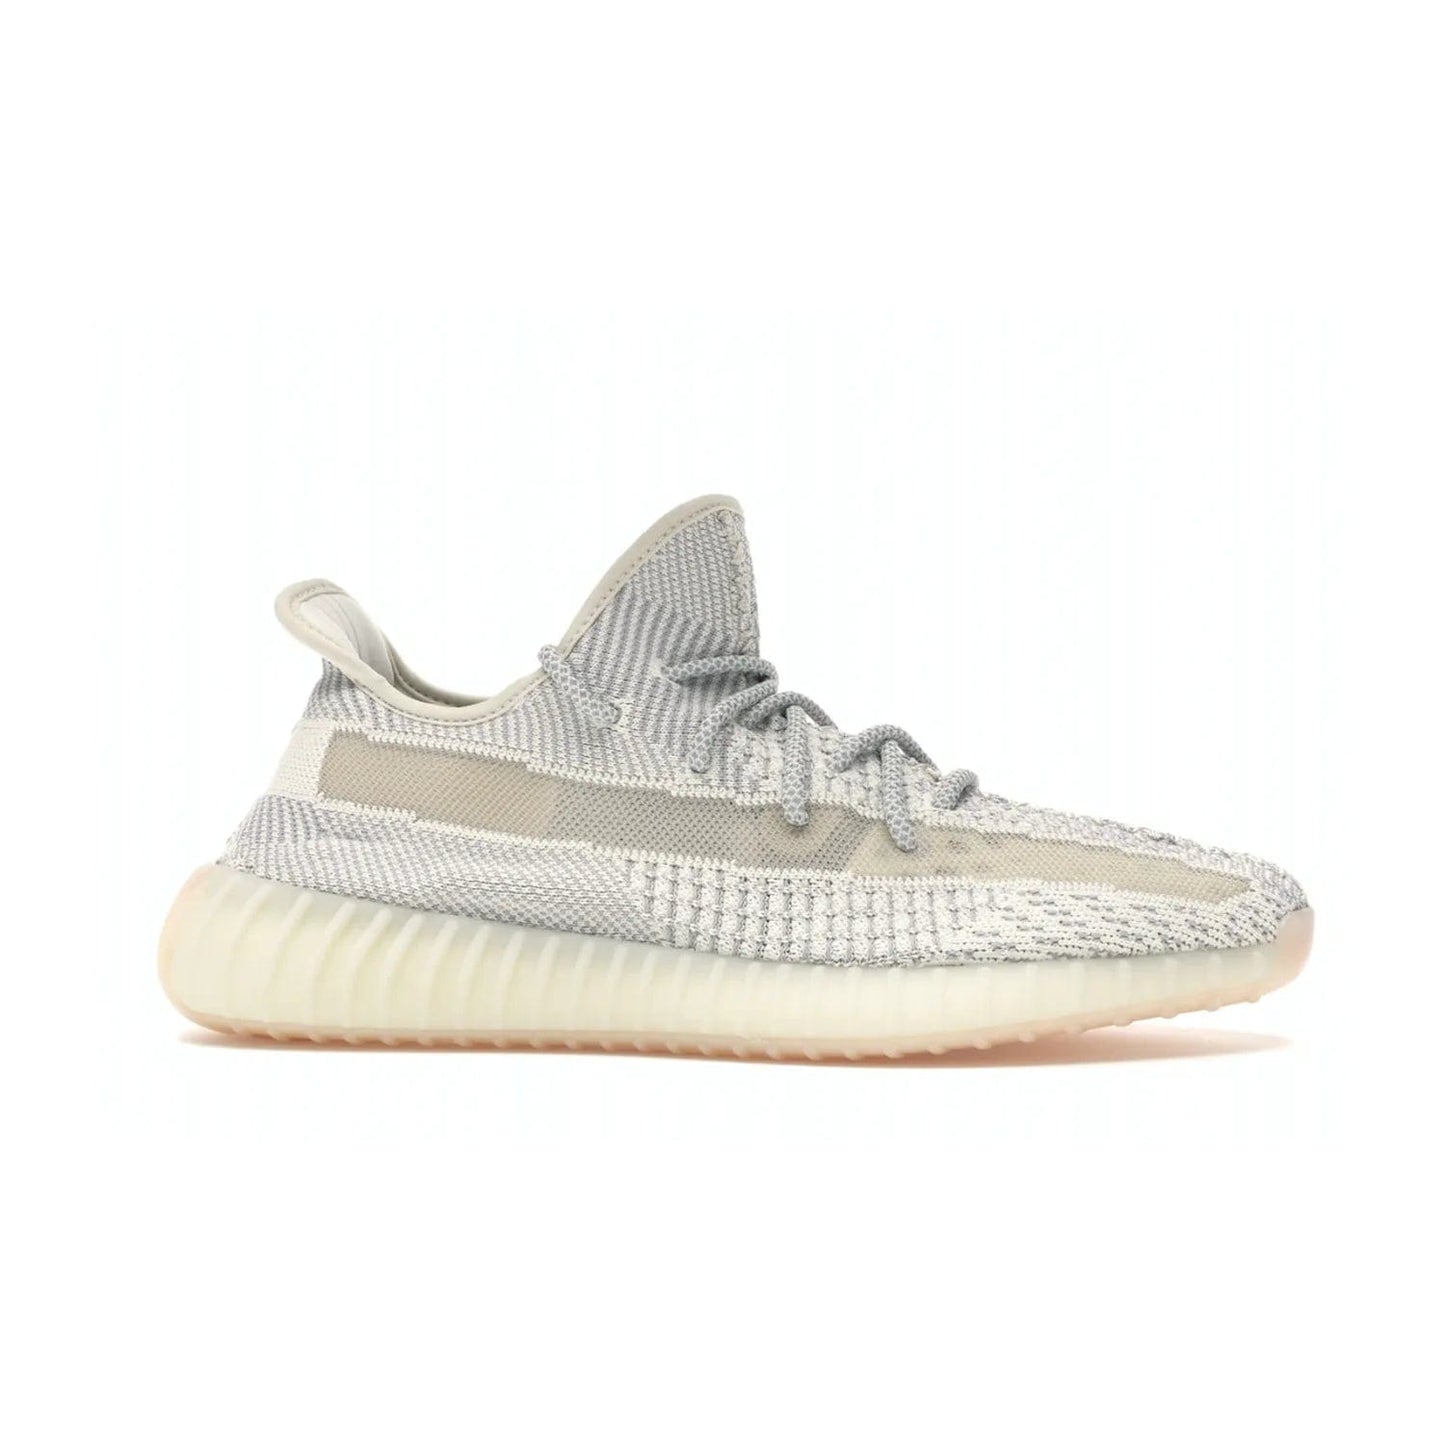 adidas Yeezy Boost 350 V2 Lundmark (Non Reflective) - Image 2 - Only at www.BallersClubKickz.com - Shop the exclusive adidas Yeezy Boost 350 V2 Lundmark with a subtle summer color, mesh upper, white-to-cream transitional midsole, light tan outsole, and pink middle stripe. Comfort and style come together in this perfect summer 350 V2. Released on July 11, 2019.